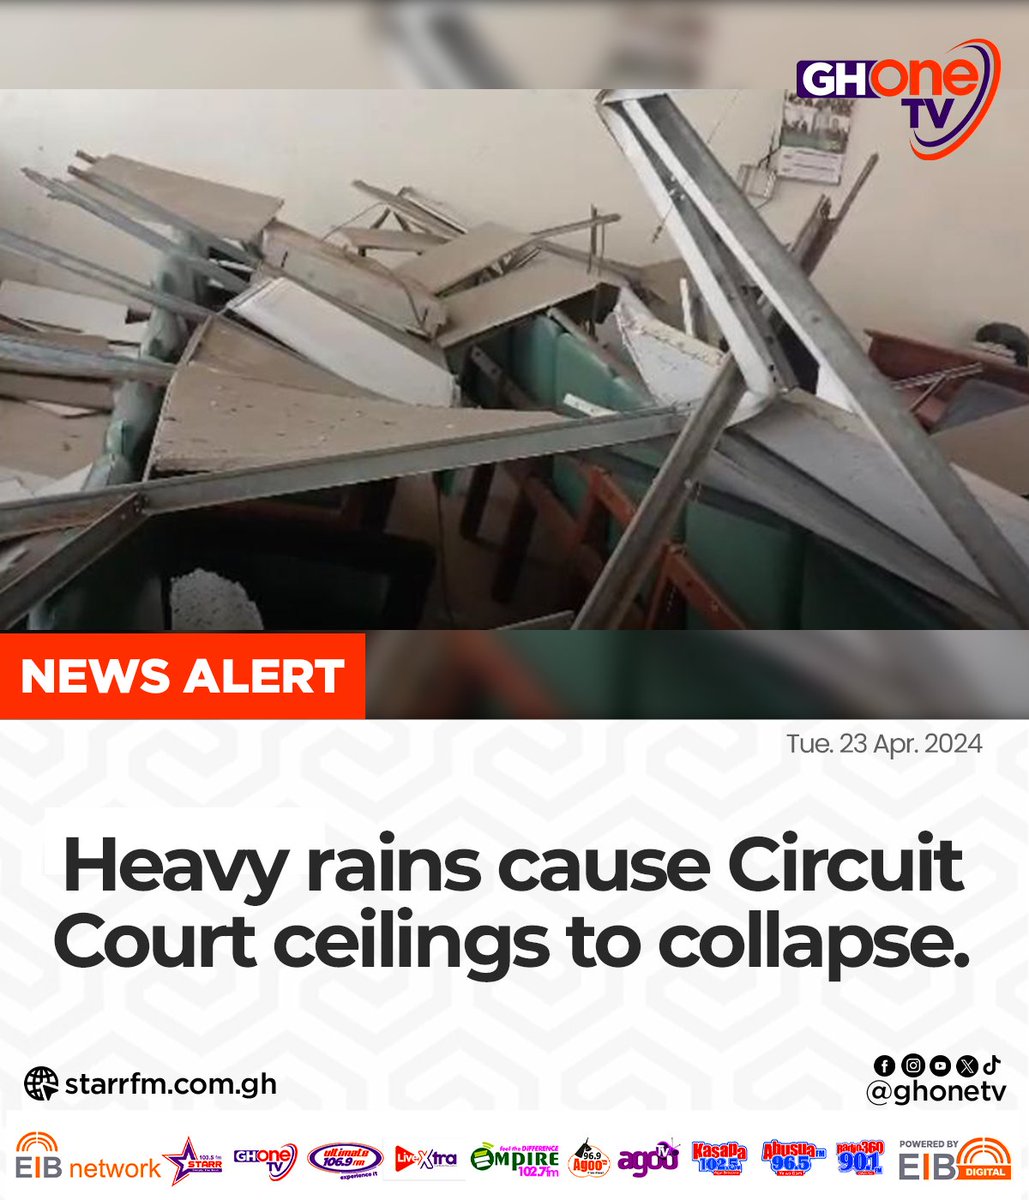 One of the Circuit Courts in Accra was left in tatters after its ceiling fell apart during today's downpour. #NewsAlert #GHOneNews #GHOneTV